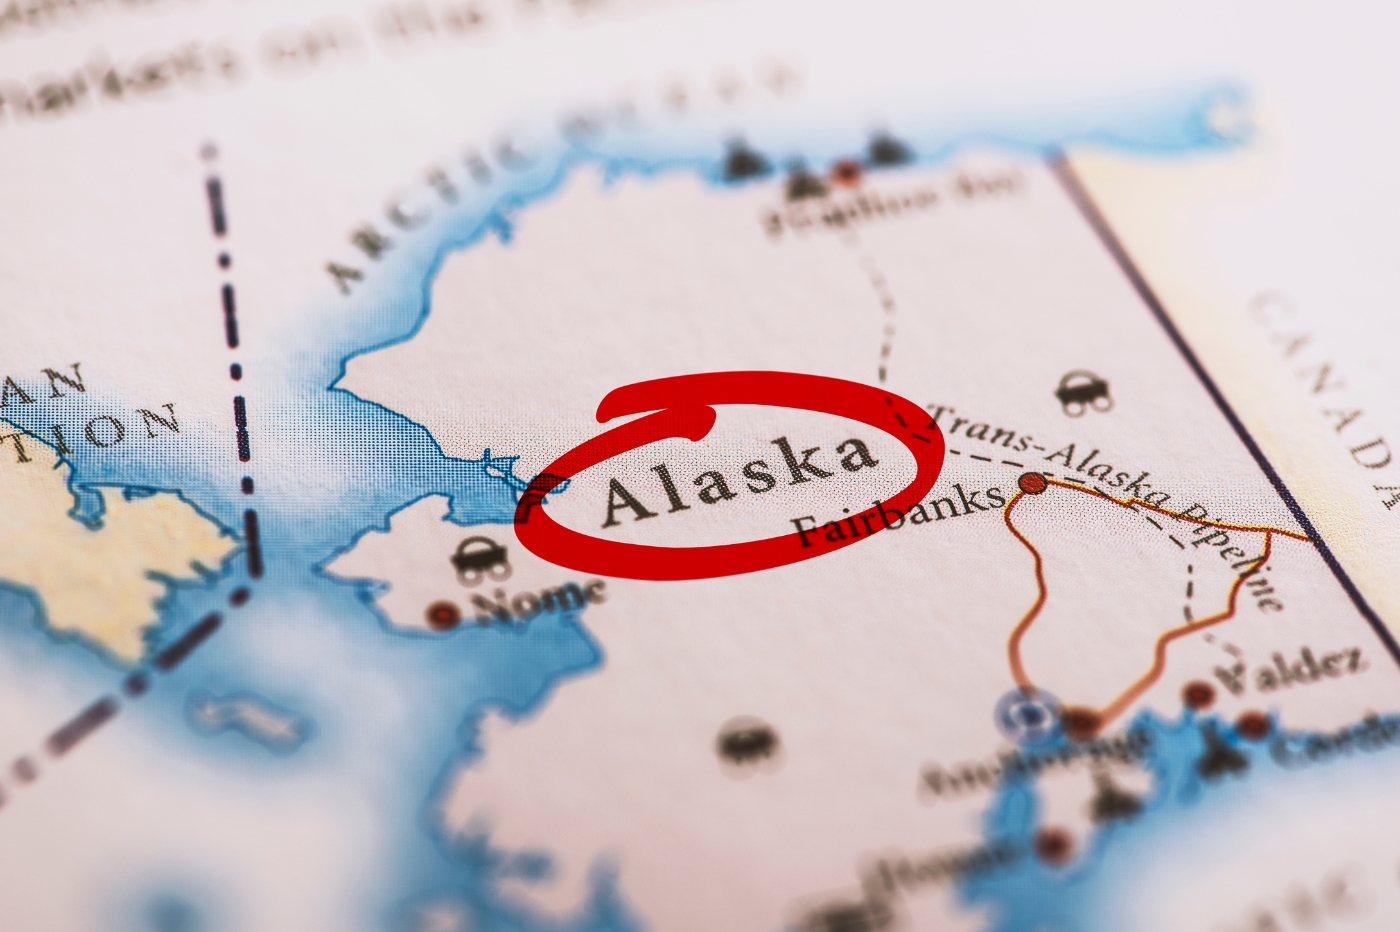 Alaska Project by iphon